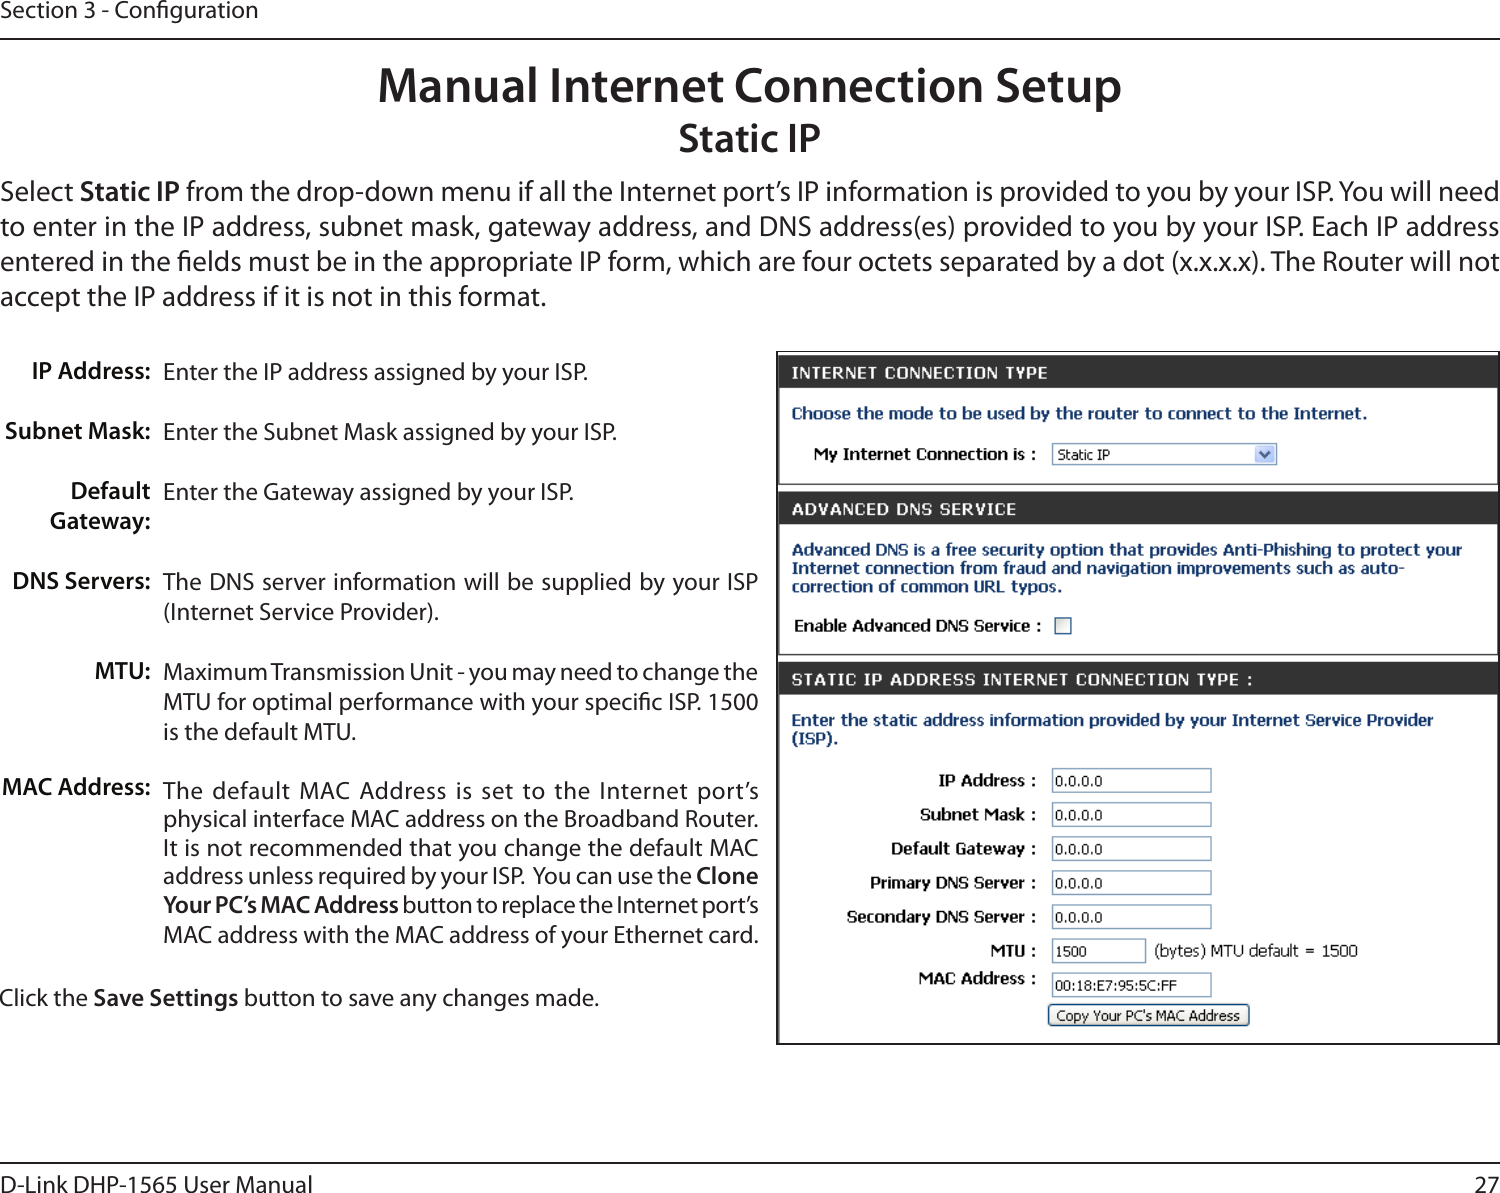 27D-Link DHP-1565 User ManualSection 3 - CongurationEnter the IP address assigned by your ISP.Enter the Subnet Mask assigned by your ISP.Enter the Gateway assigned by your ISP.The DNS server information will be supplied by your ISP (Internet Service Provider).Maximum Transmission Unit - you may need to change the MTU for optimal performance with your specic ISP. 1500 is the default MTU.The  default  MAC  Address  is  set  to  the  Internet  port’s physical interface MAC address on the Broadband Router. It is not recommended that you change the default MAC address unless required by your ISP.  You can use the Clone Your PC’s MAC Address button to replace the Internet port’s MAC address with the MAC address of your Ethernet card.IP Address:Subnet Mask:Default Gateway:DNS Servers:MTU:MAC Address:Manual Internet Connection SetupStatic IPSelect Static IP from the drop-down menu if all the Internet port’s IP information is provided to you by your ISP. You will need to enter in the IP address, subnet mask, gateway address, and DNS address(es) provided to you by your ISP. Each IP address entered in the elds must be in the appropriate IP form, which are four octets separated by a dot (x.x.x.x). The Router will not accept the IP address if it is not in this format.Click the Save Settings button to save any changes made.